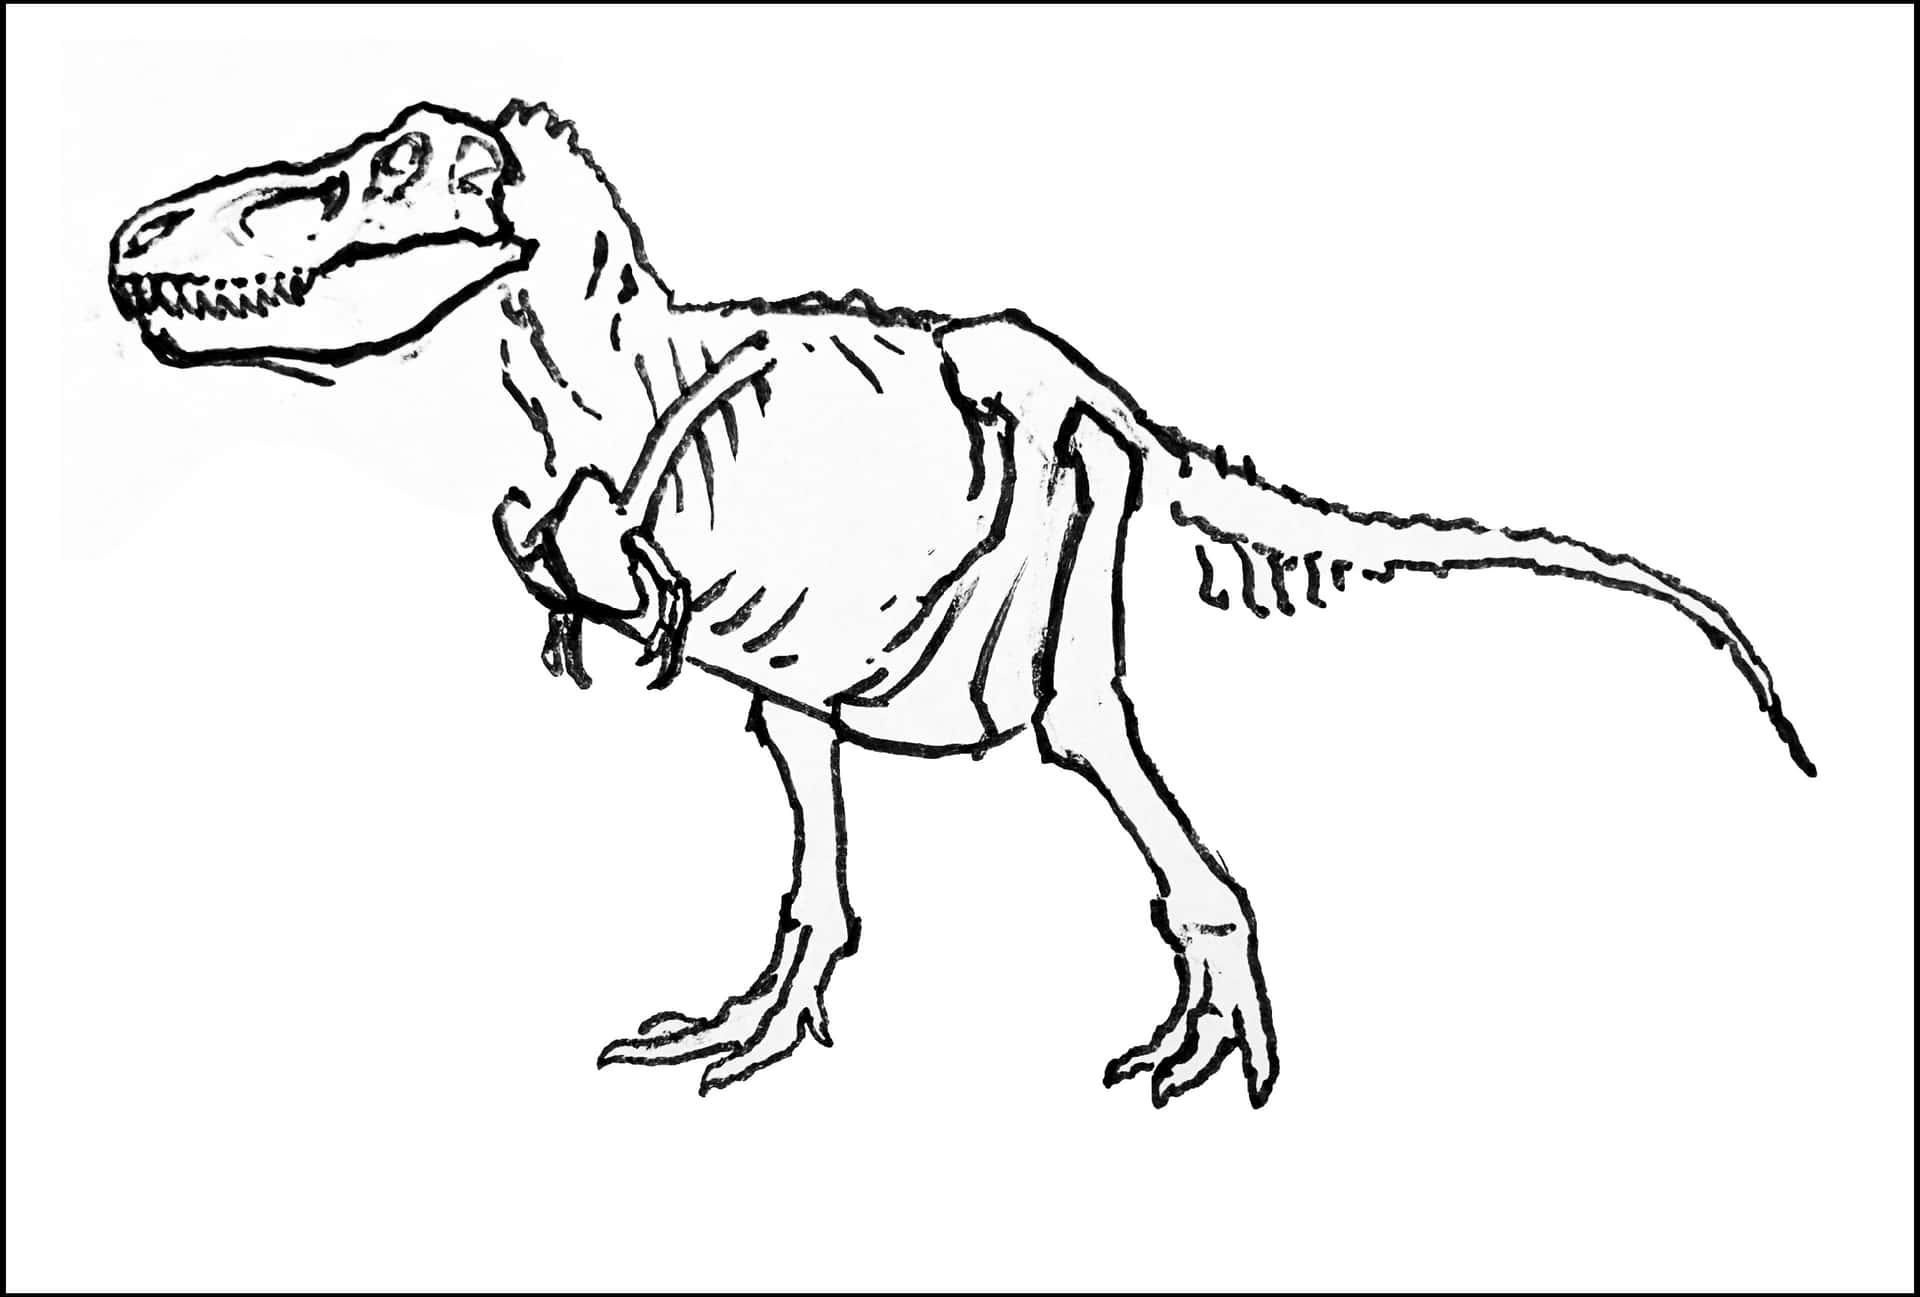 A Detailed Pencil Sketch Of A Dinosaur